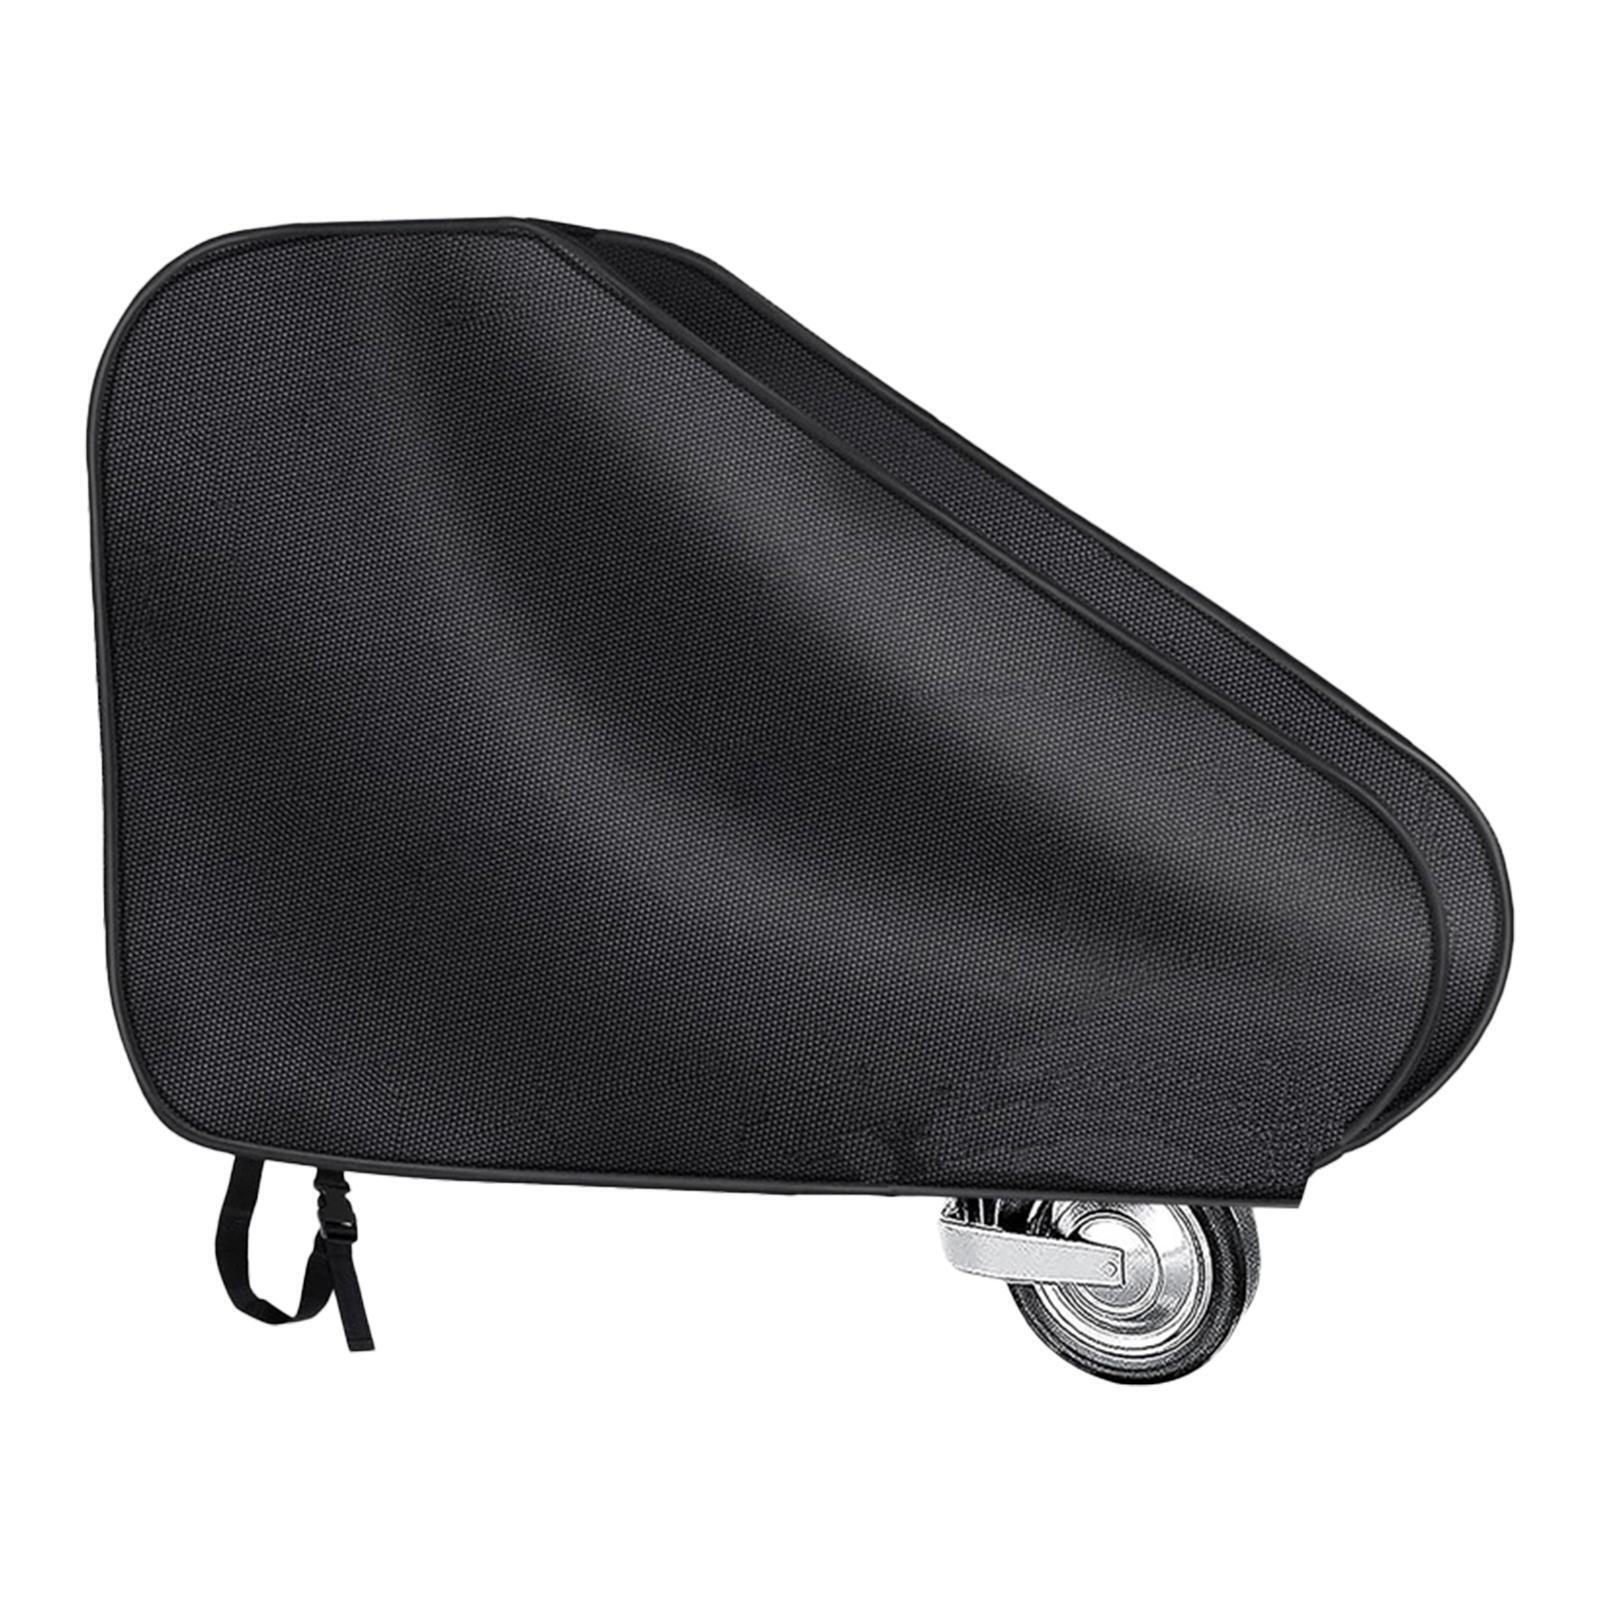 Caravan Hitch Cover Breathable Waterproof RV Caravan Trailer Tow Hitch Cover